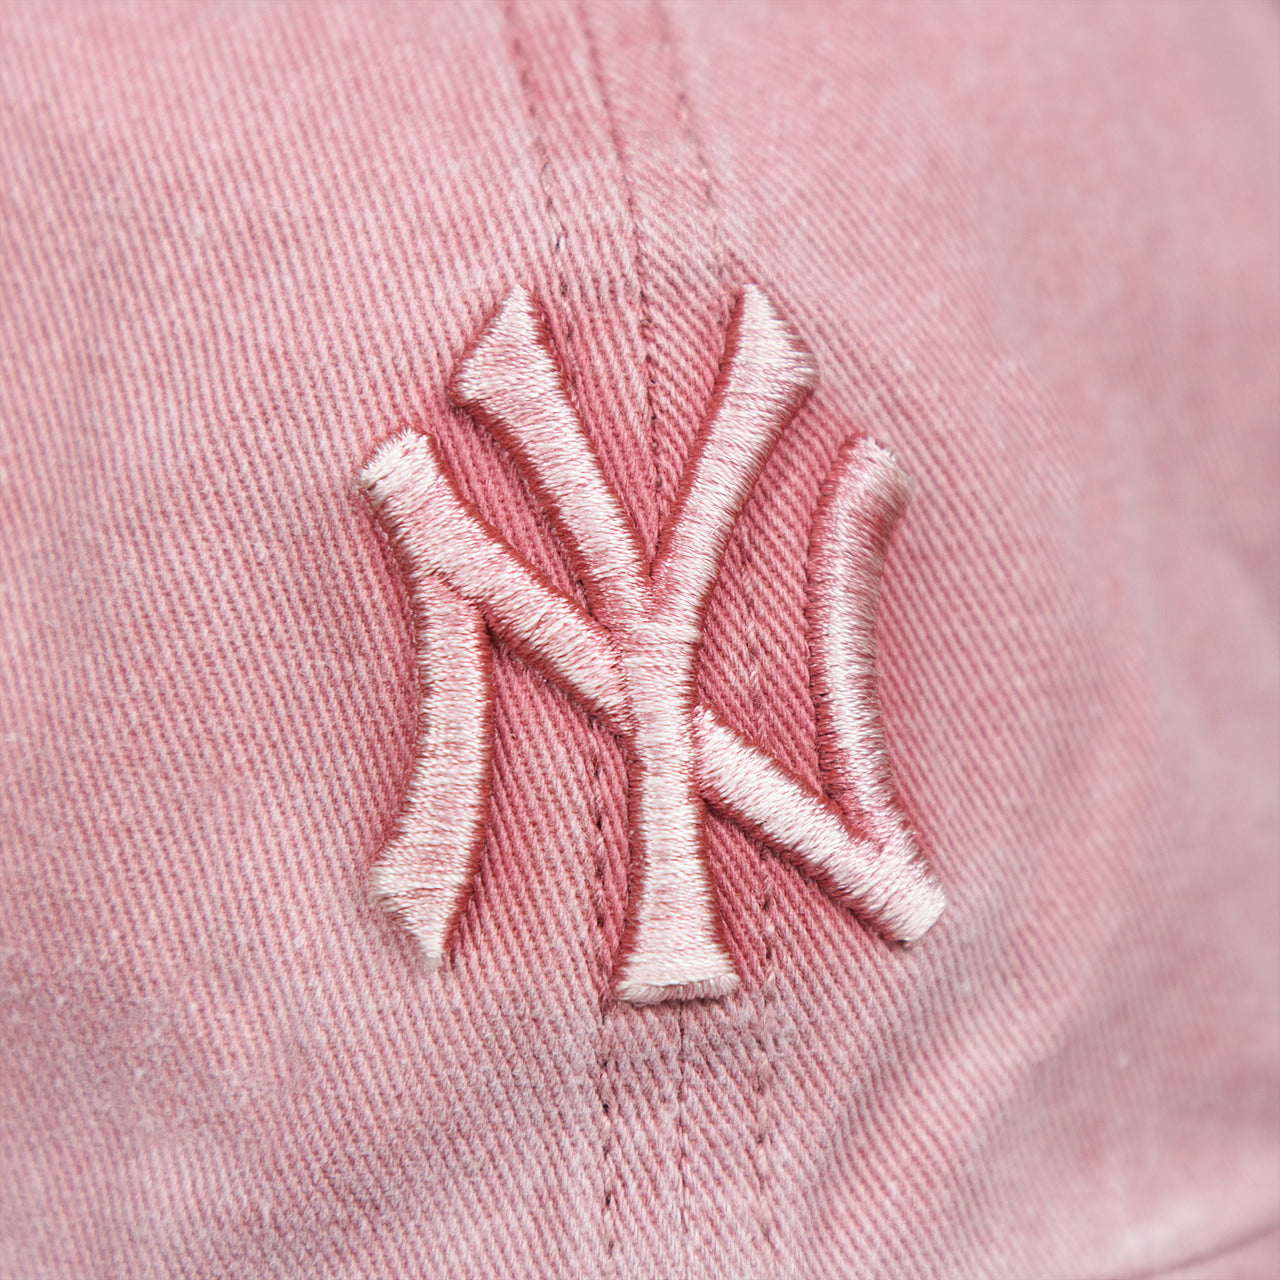 The Yankees Logo on the Women’s New York Yankees Gray Bottom Vintage Washed Dad Hat | Vintage Pink Women’s Dad Hat